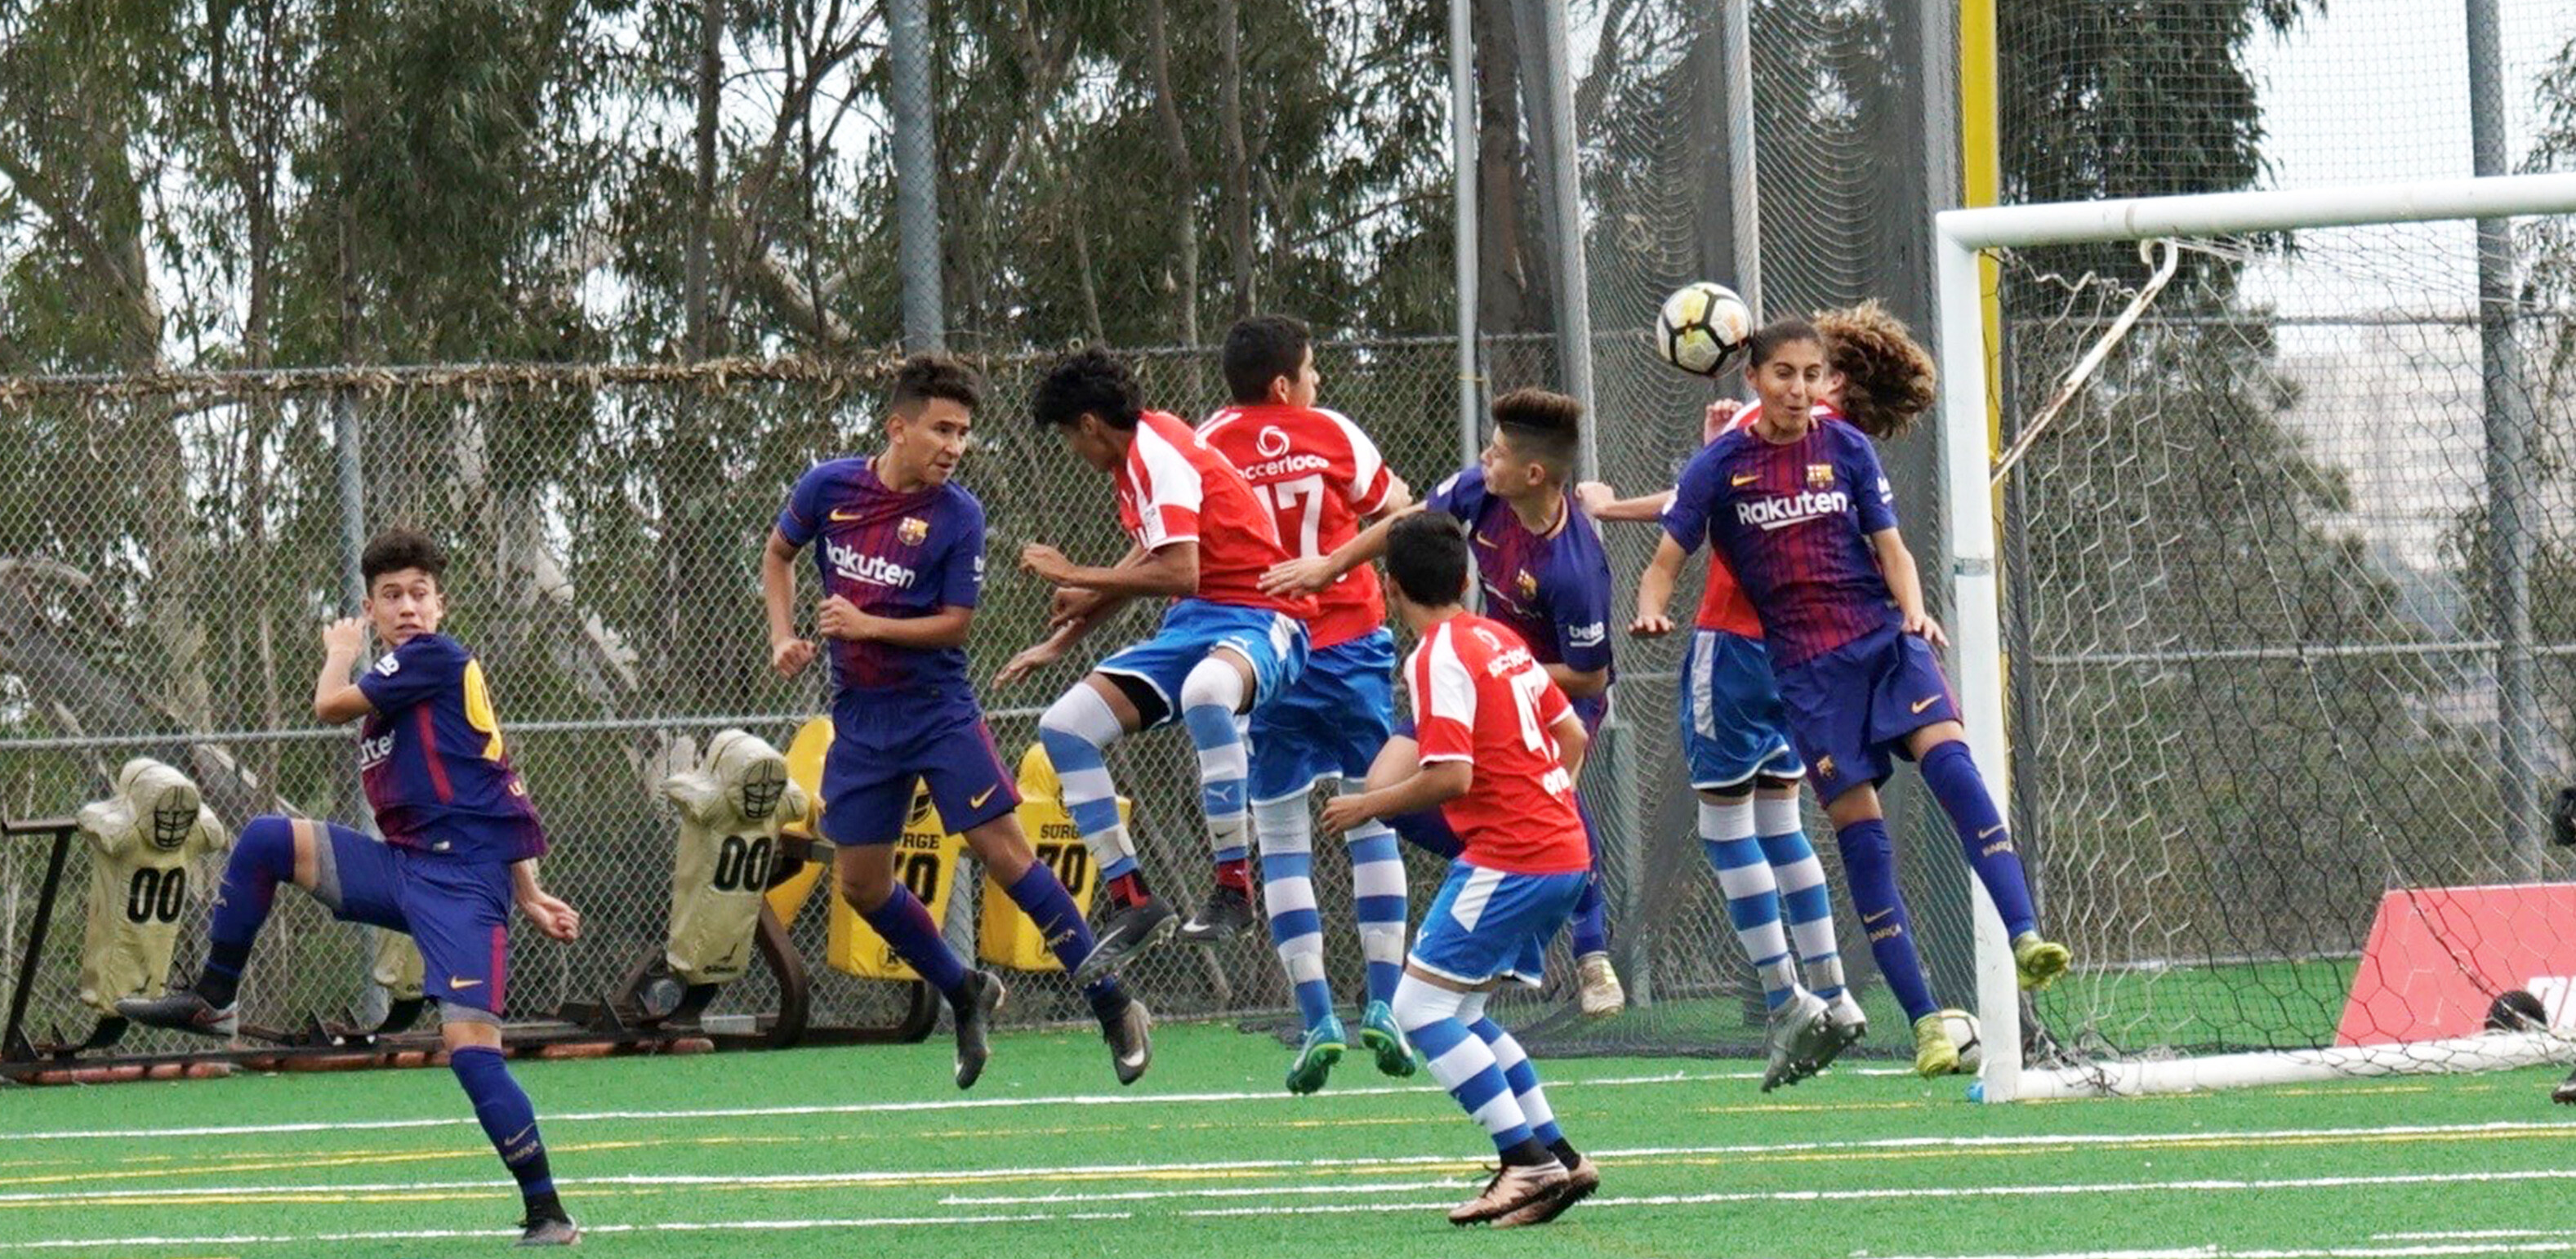 Barca Academy has mixed results with Albion